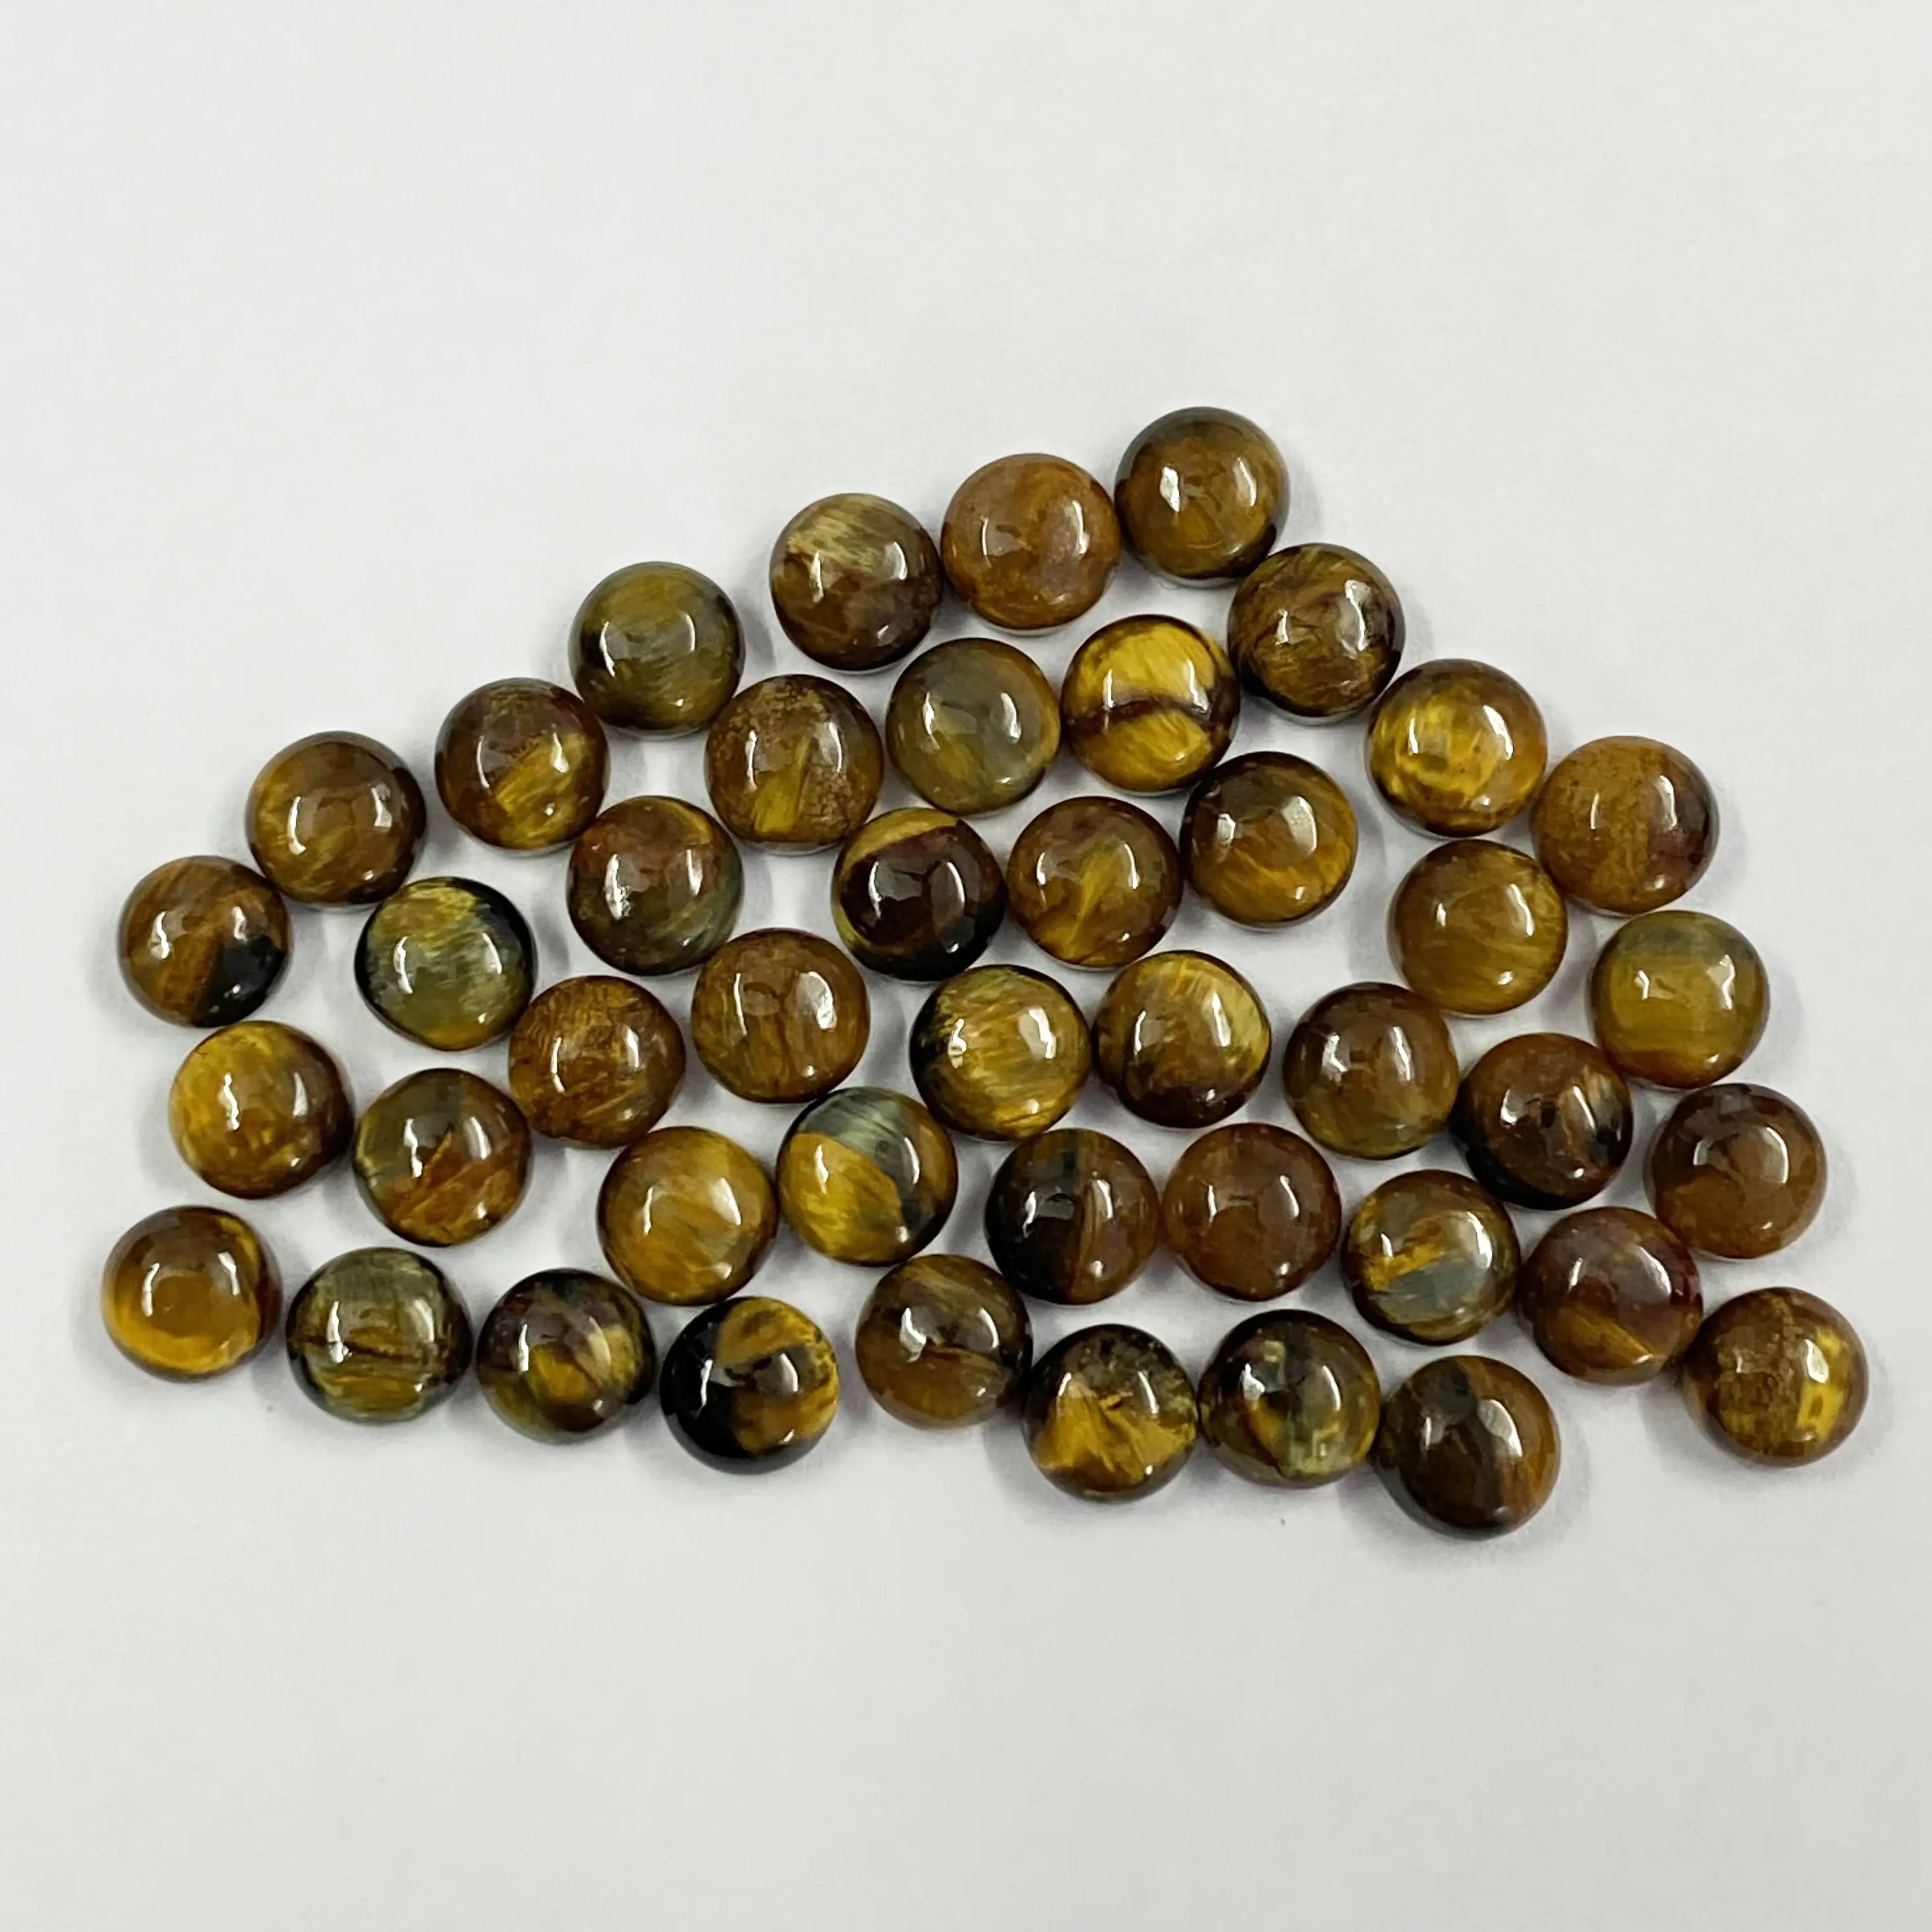 Shop Online From Great Selection At Jewelry Store Real Natural 4mm Golden Pietersite Certified Loose Gemstone